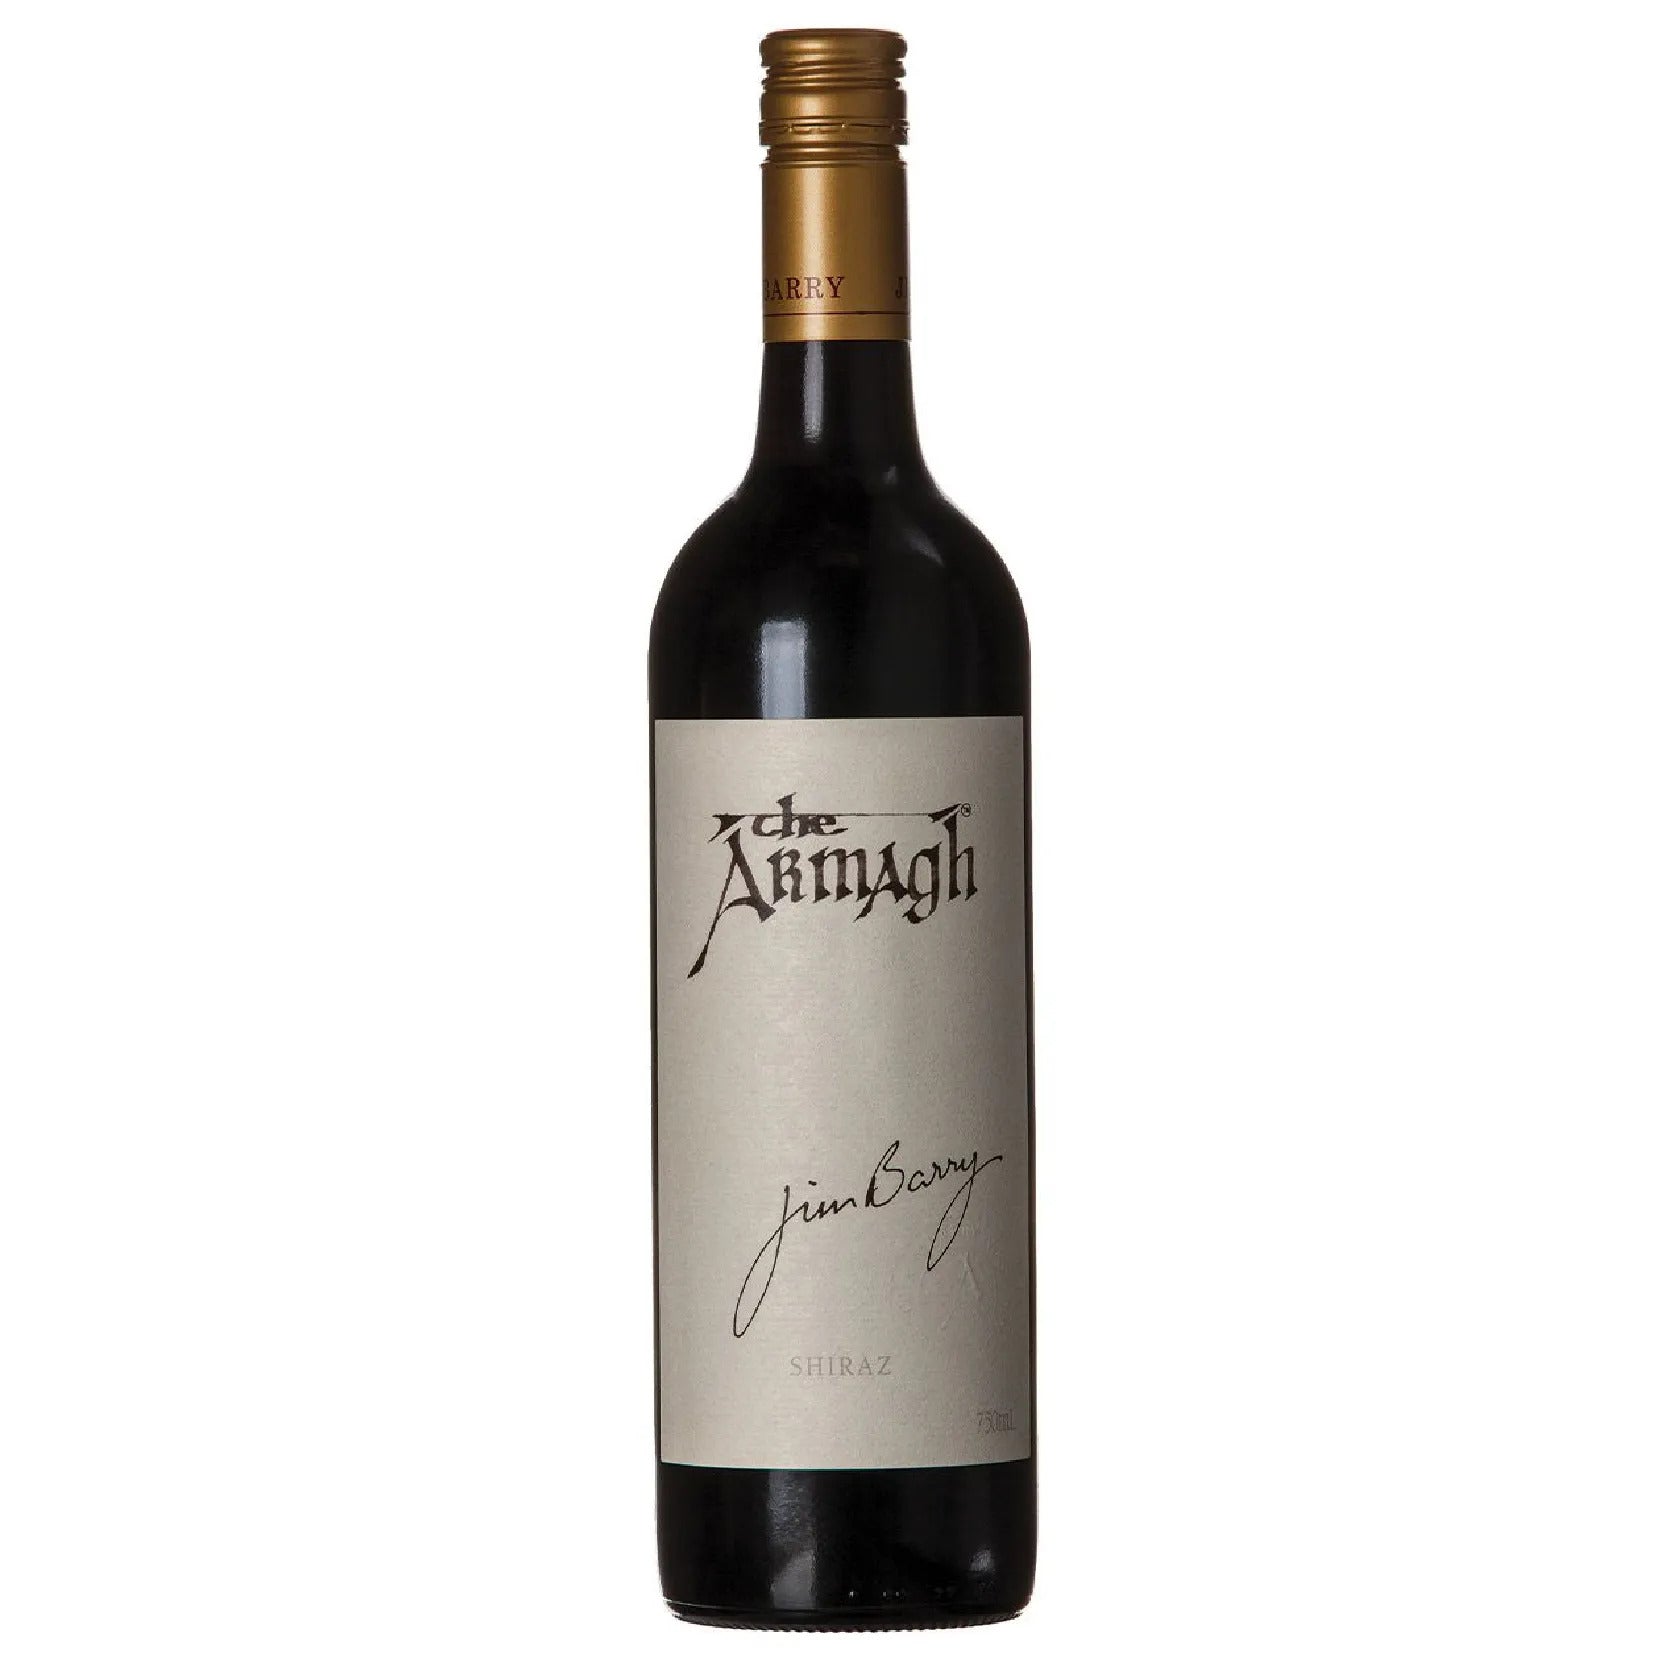 2008 Shiraz, The Armagh, Clare Valley, Jim Barry Wines